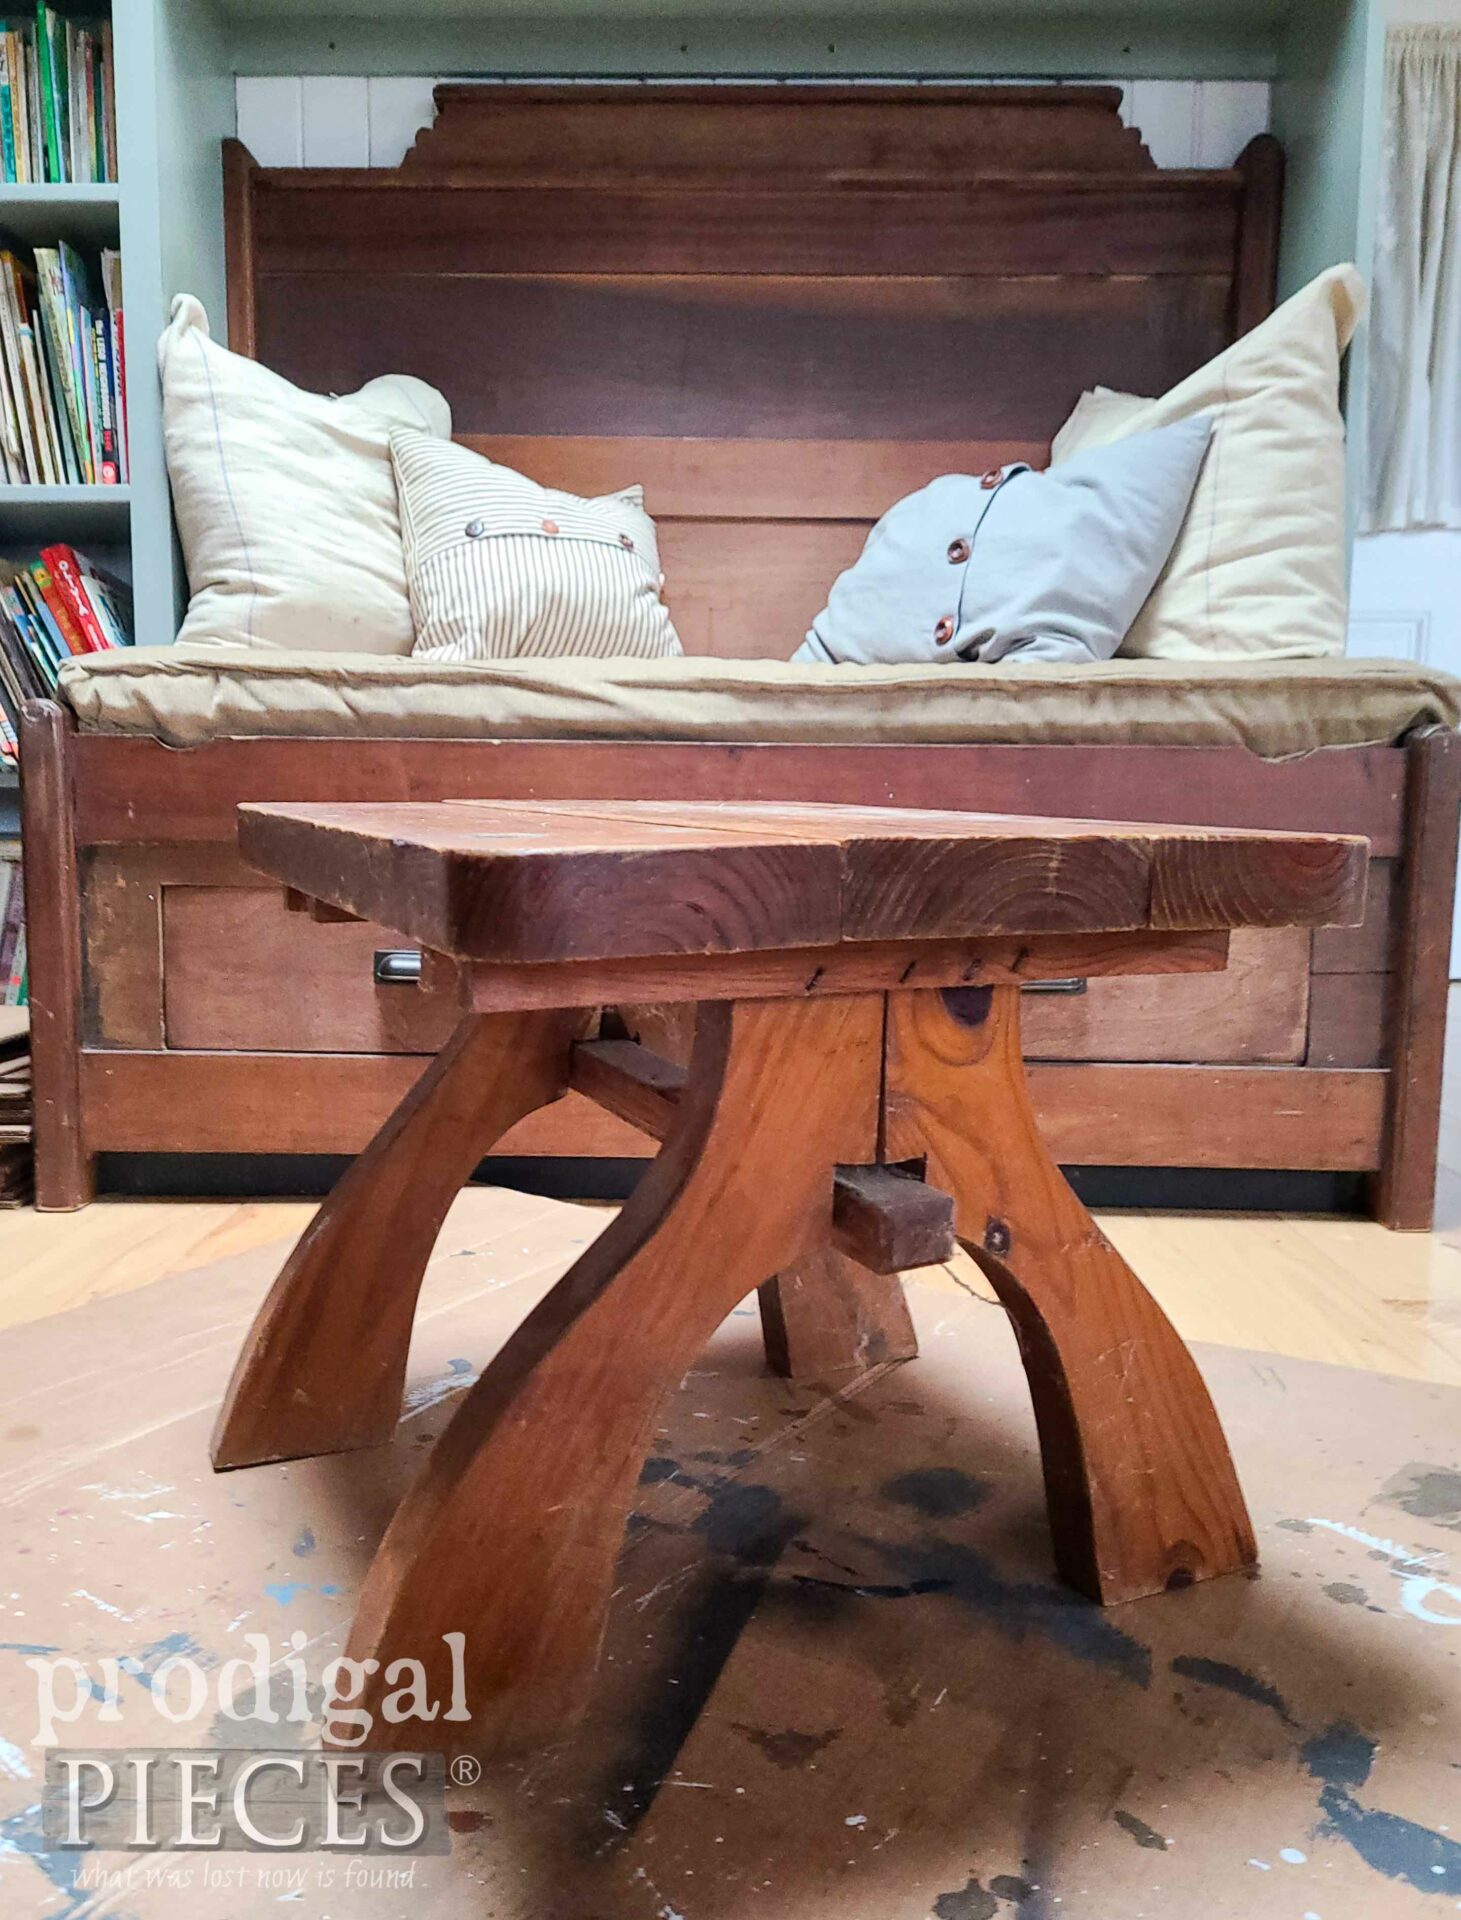 Thrifted Pine Table Before | prodigalpieces.com #prodigalpieces